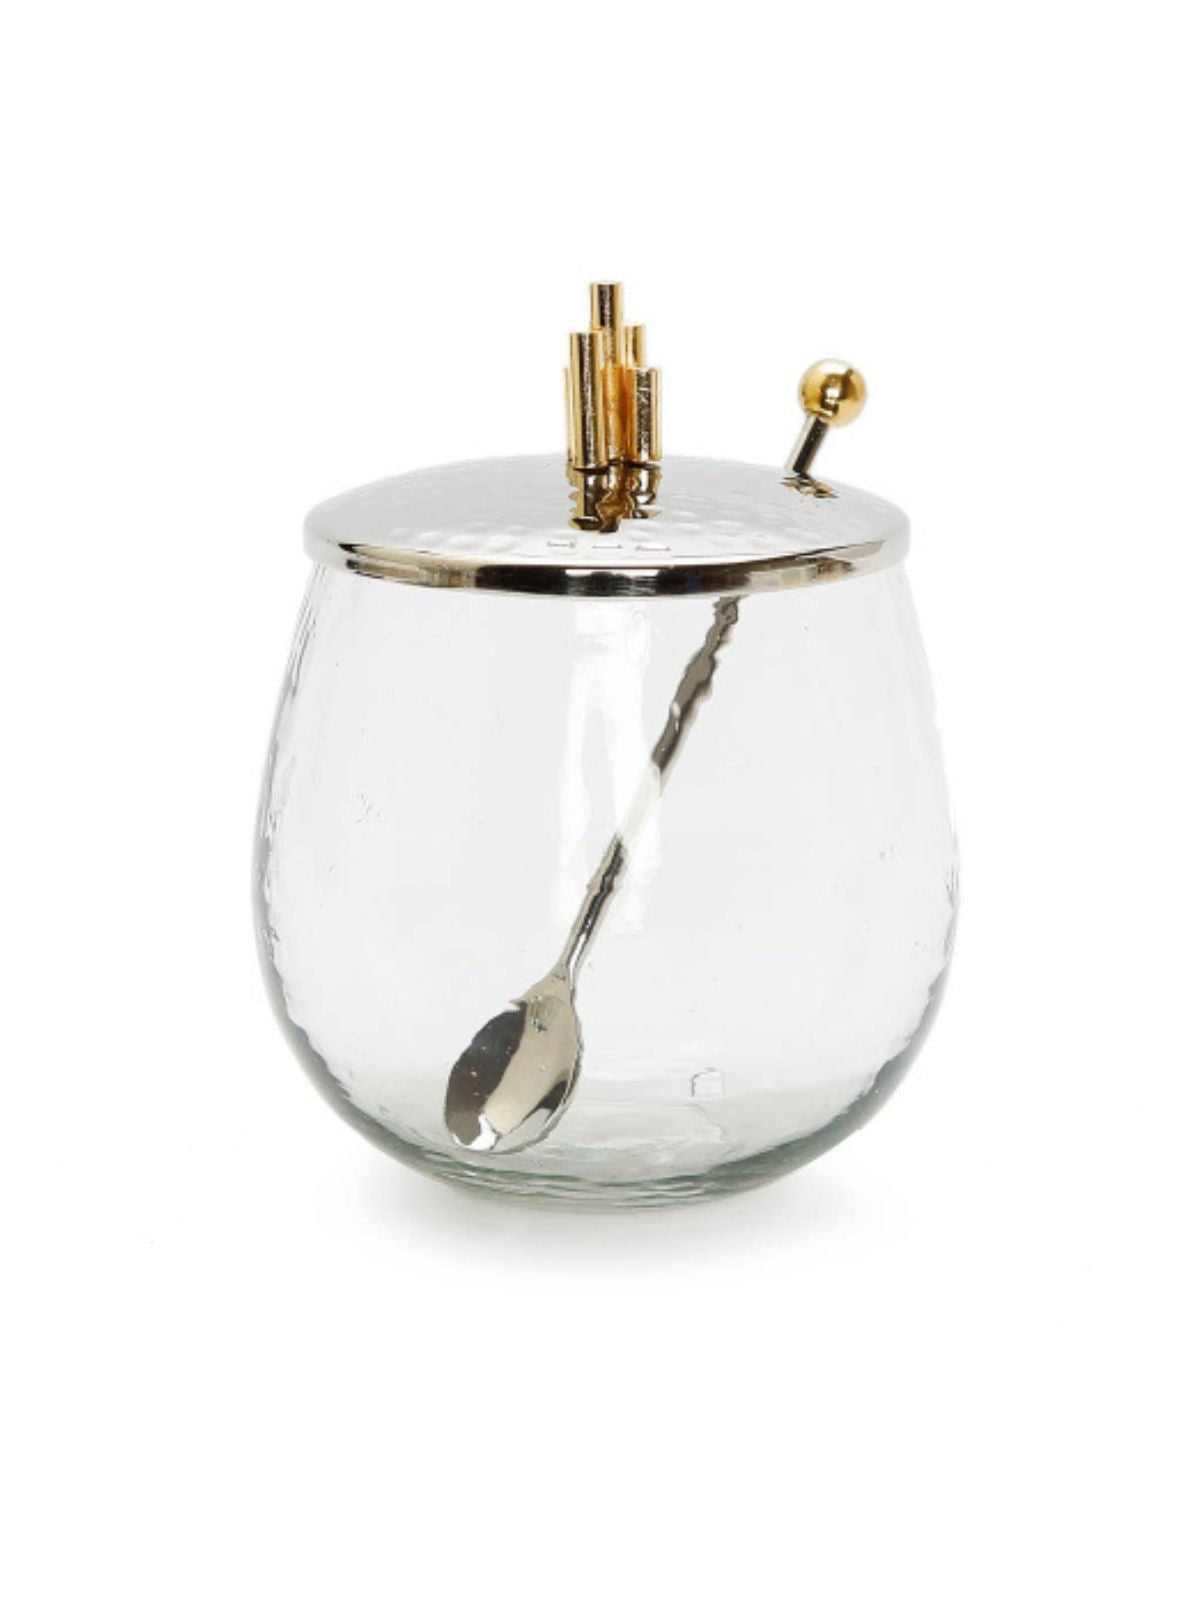 Glass Bowl With Stainless Steel Lid and Spoon with Gold Diamond Designed Knob - KYA Home Decor.